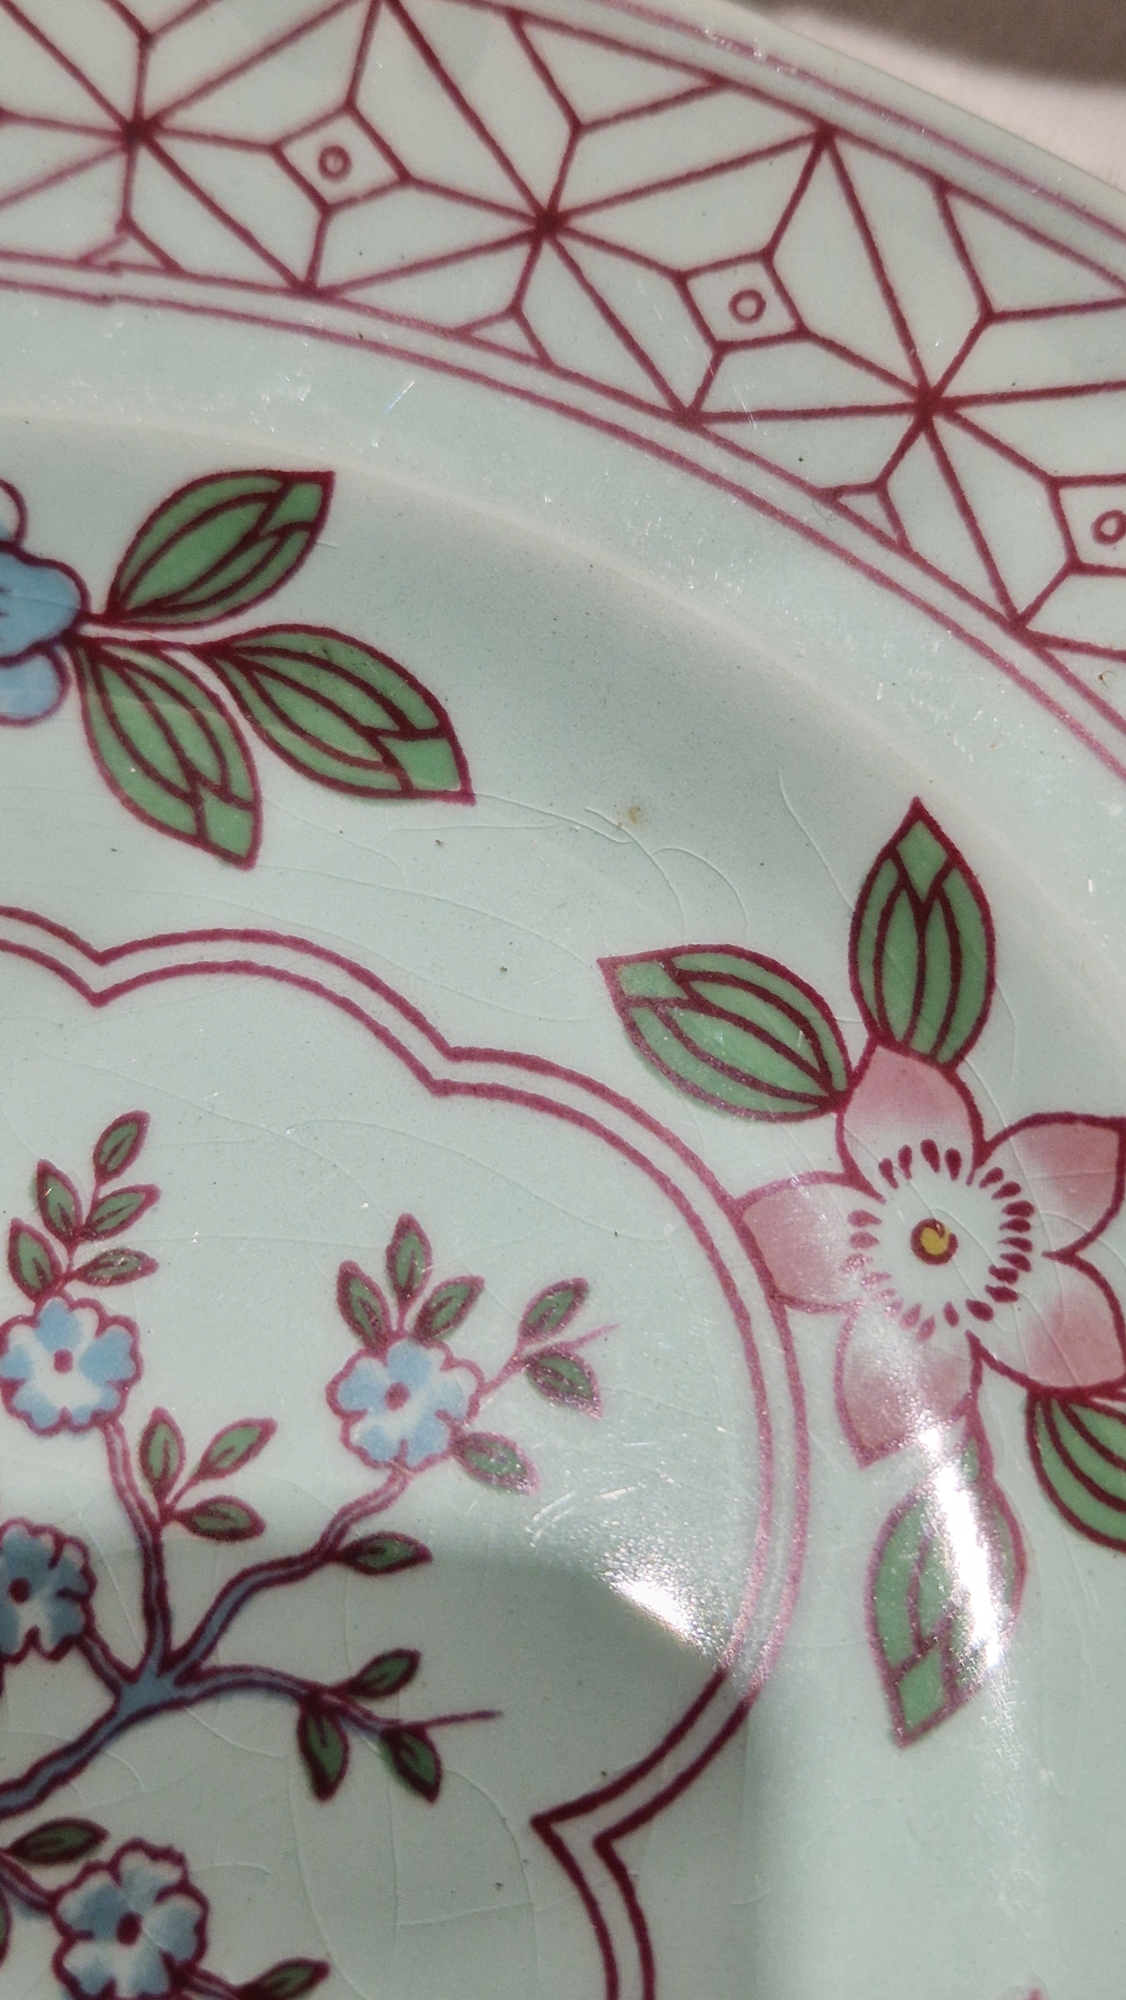 20th century Adams Calyx ware Singapore Bird pattern part tea and dinner service including a teapot, - Image 6 of 7